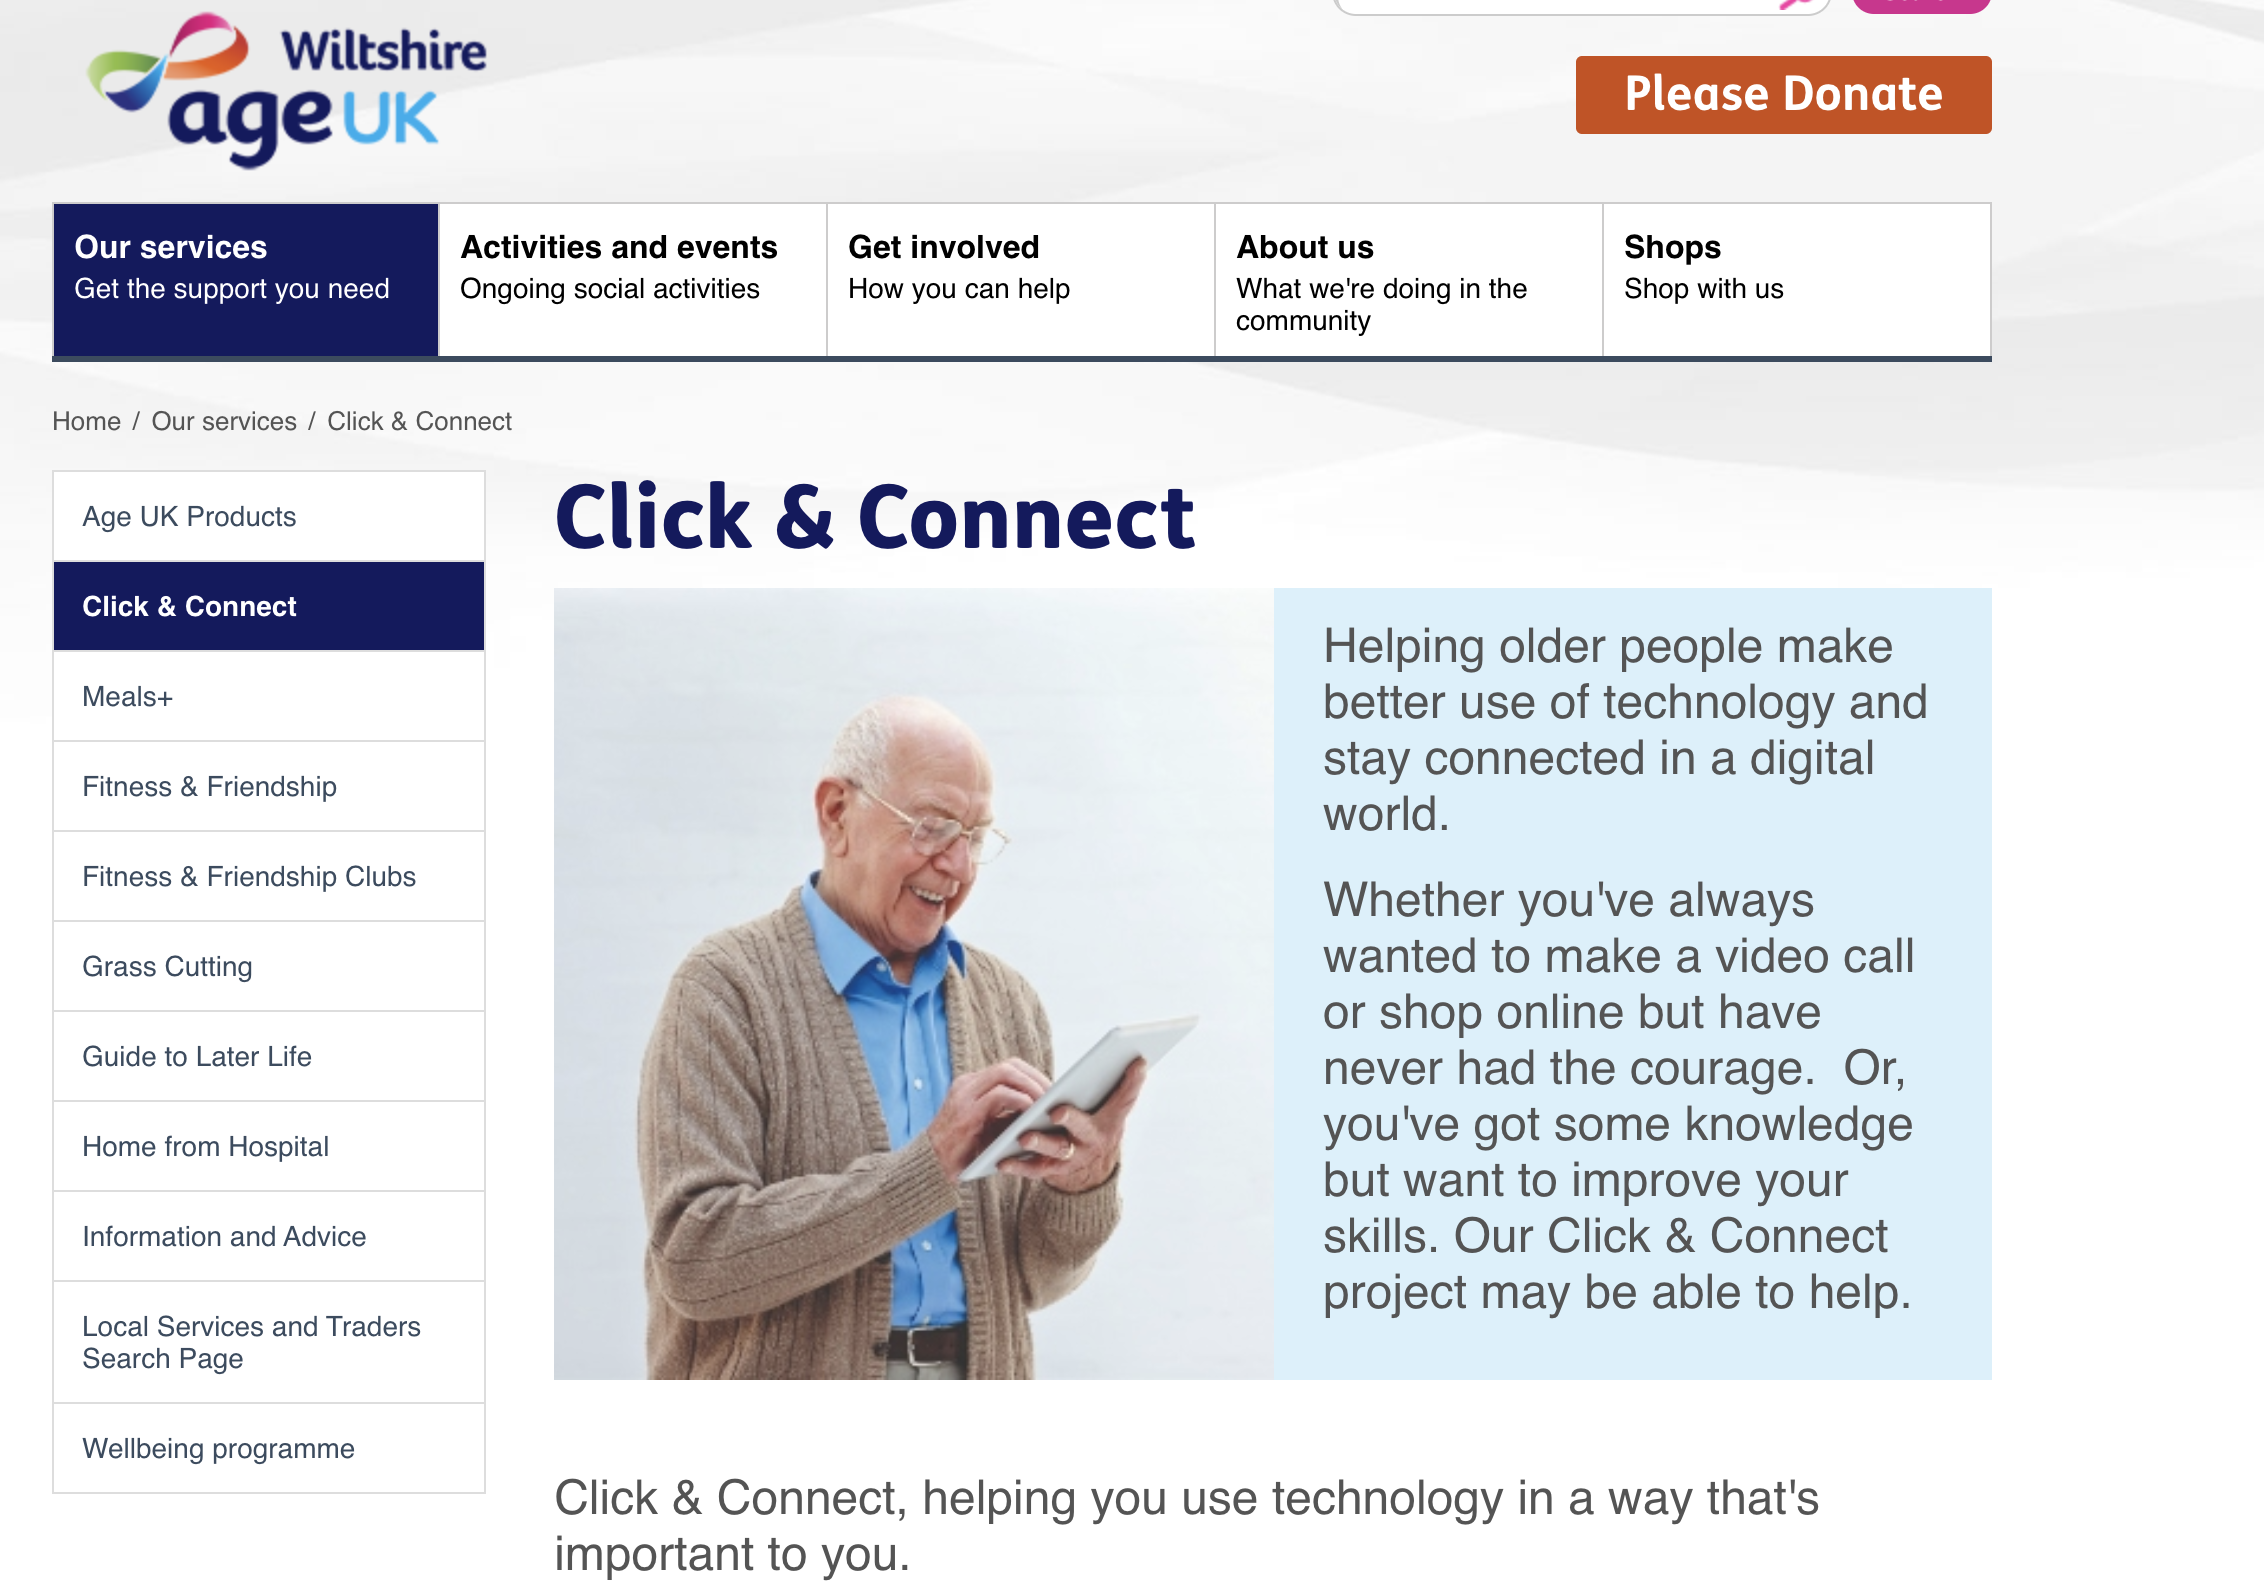 Image shows home page for the Click and Connect project and has a picture of an older gentleman holding a tablet